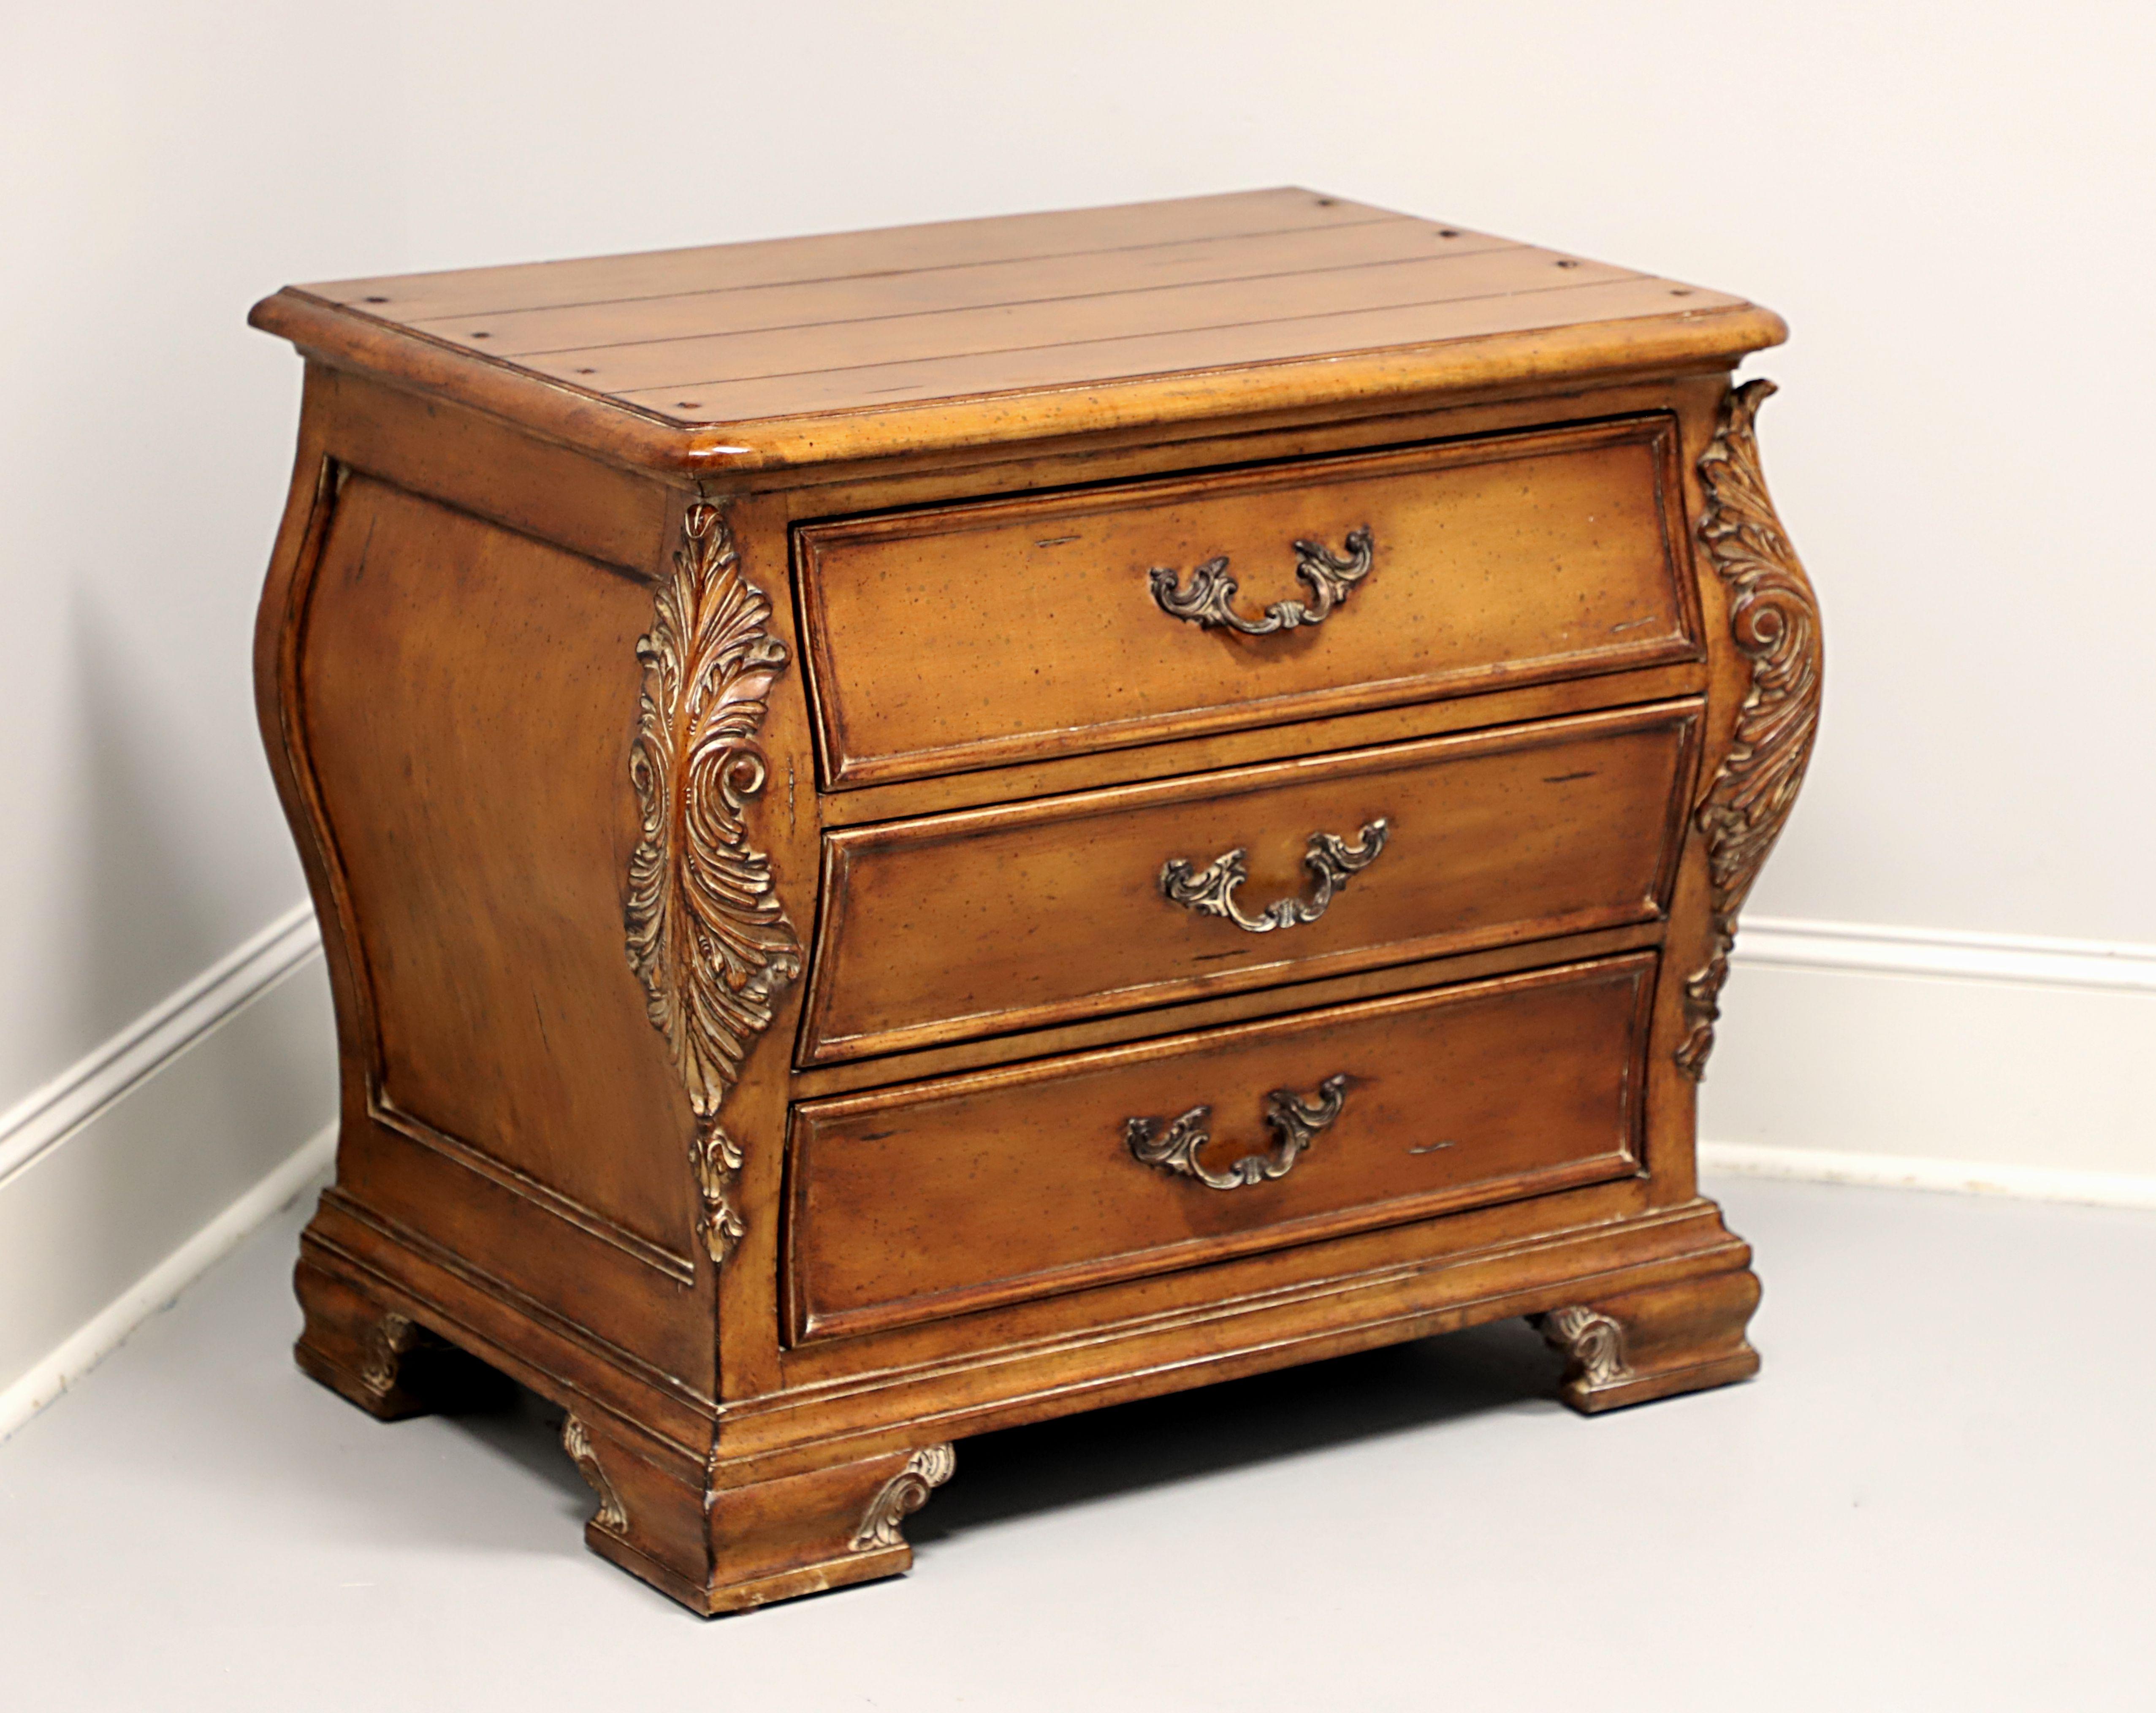 THOMASVILLE Chateau Provence French Country Nightstand Bedside Chest - A 2